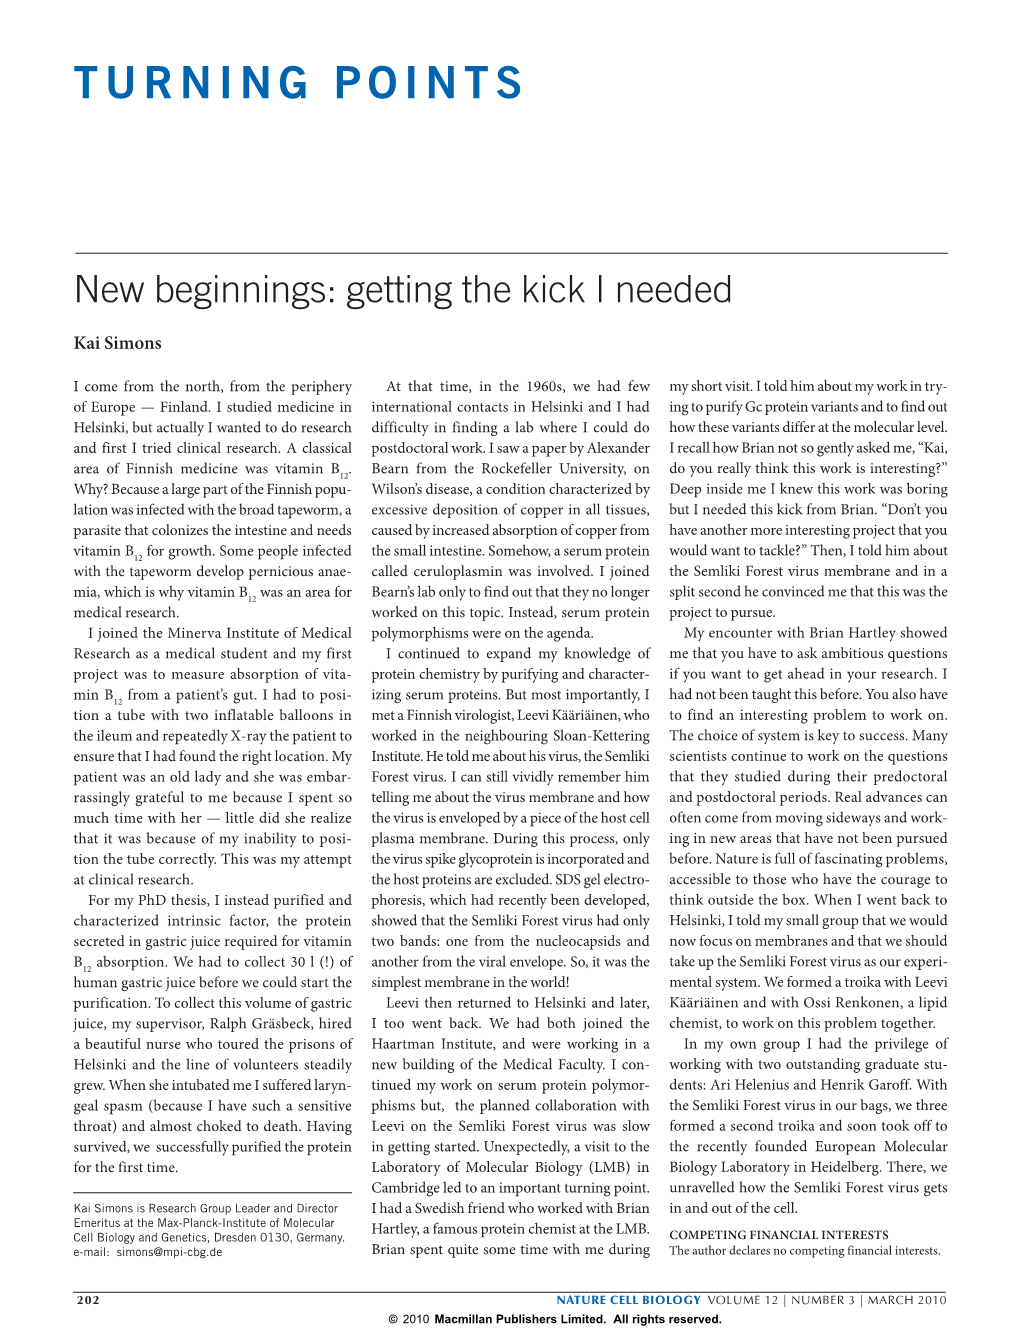 New Beginnings: Getting the Kick I Needed